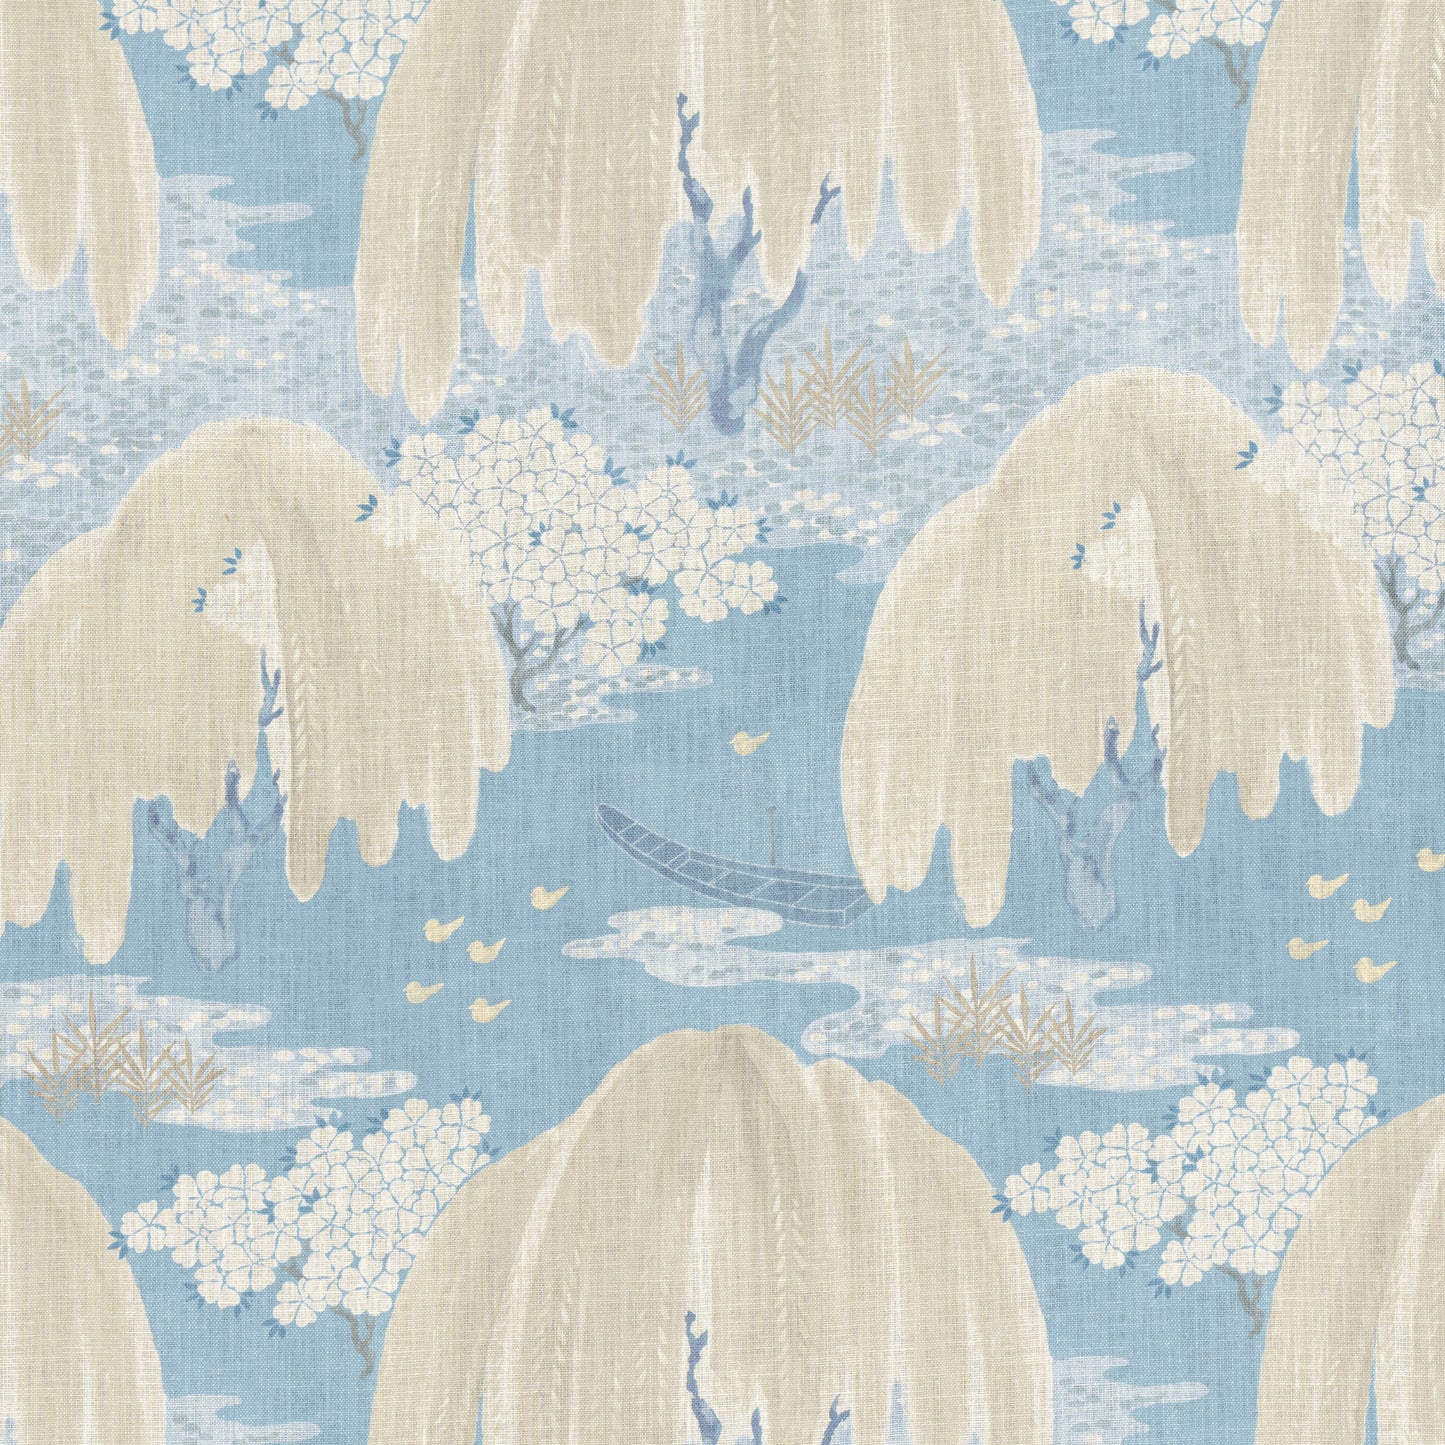 Purchase  Ann French Fabric Item AF23108  pattern name  Willow Tree